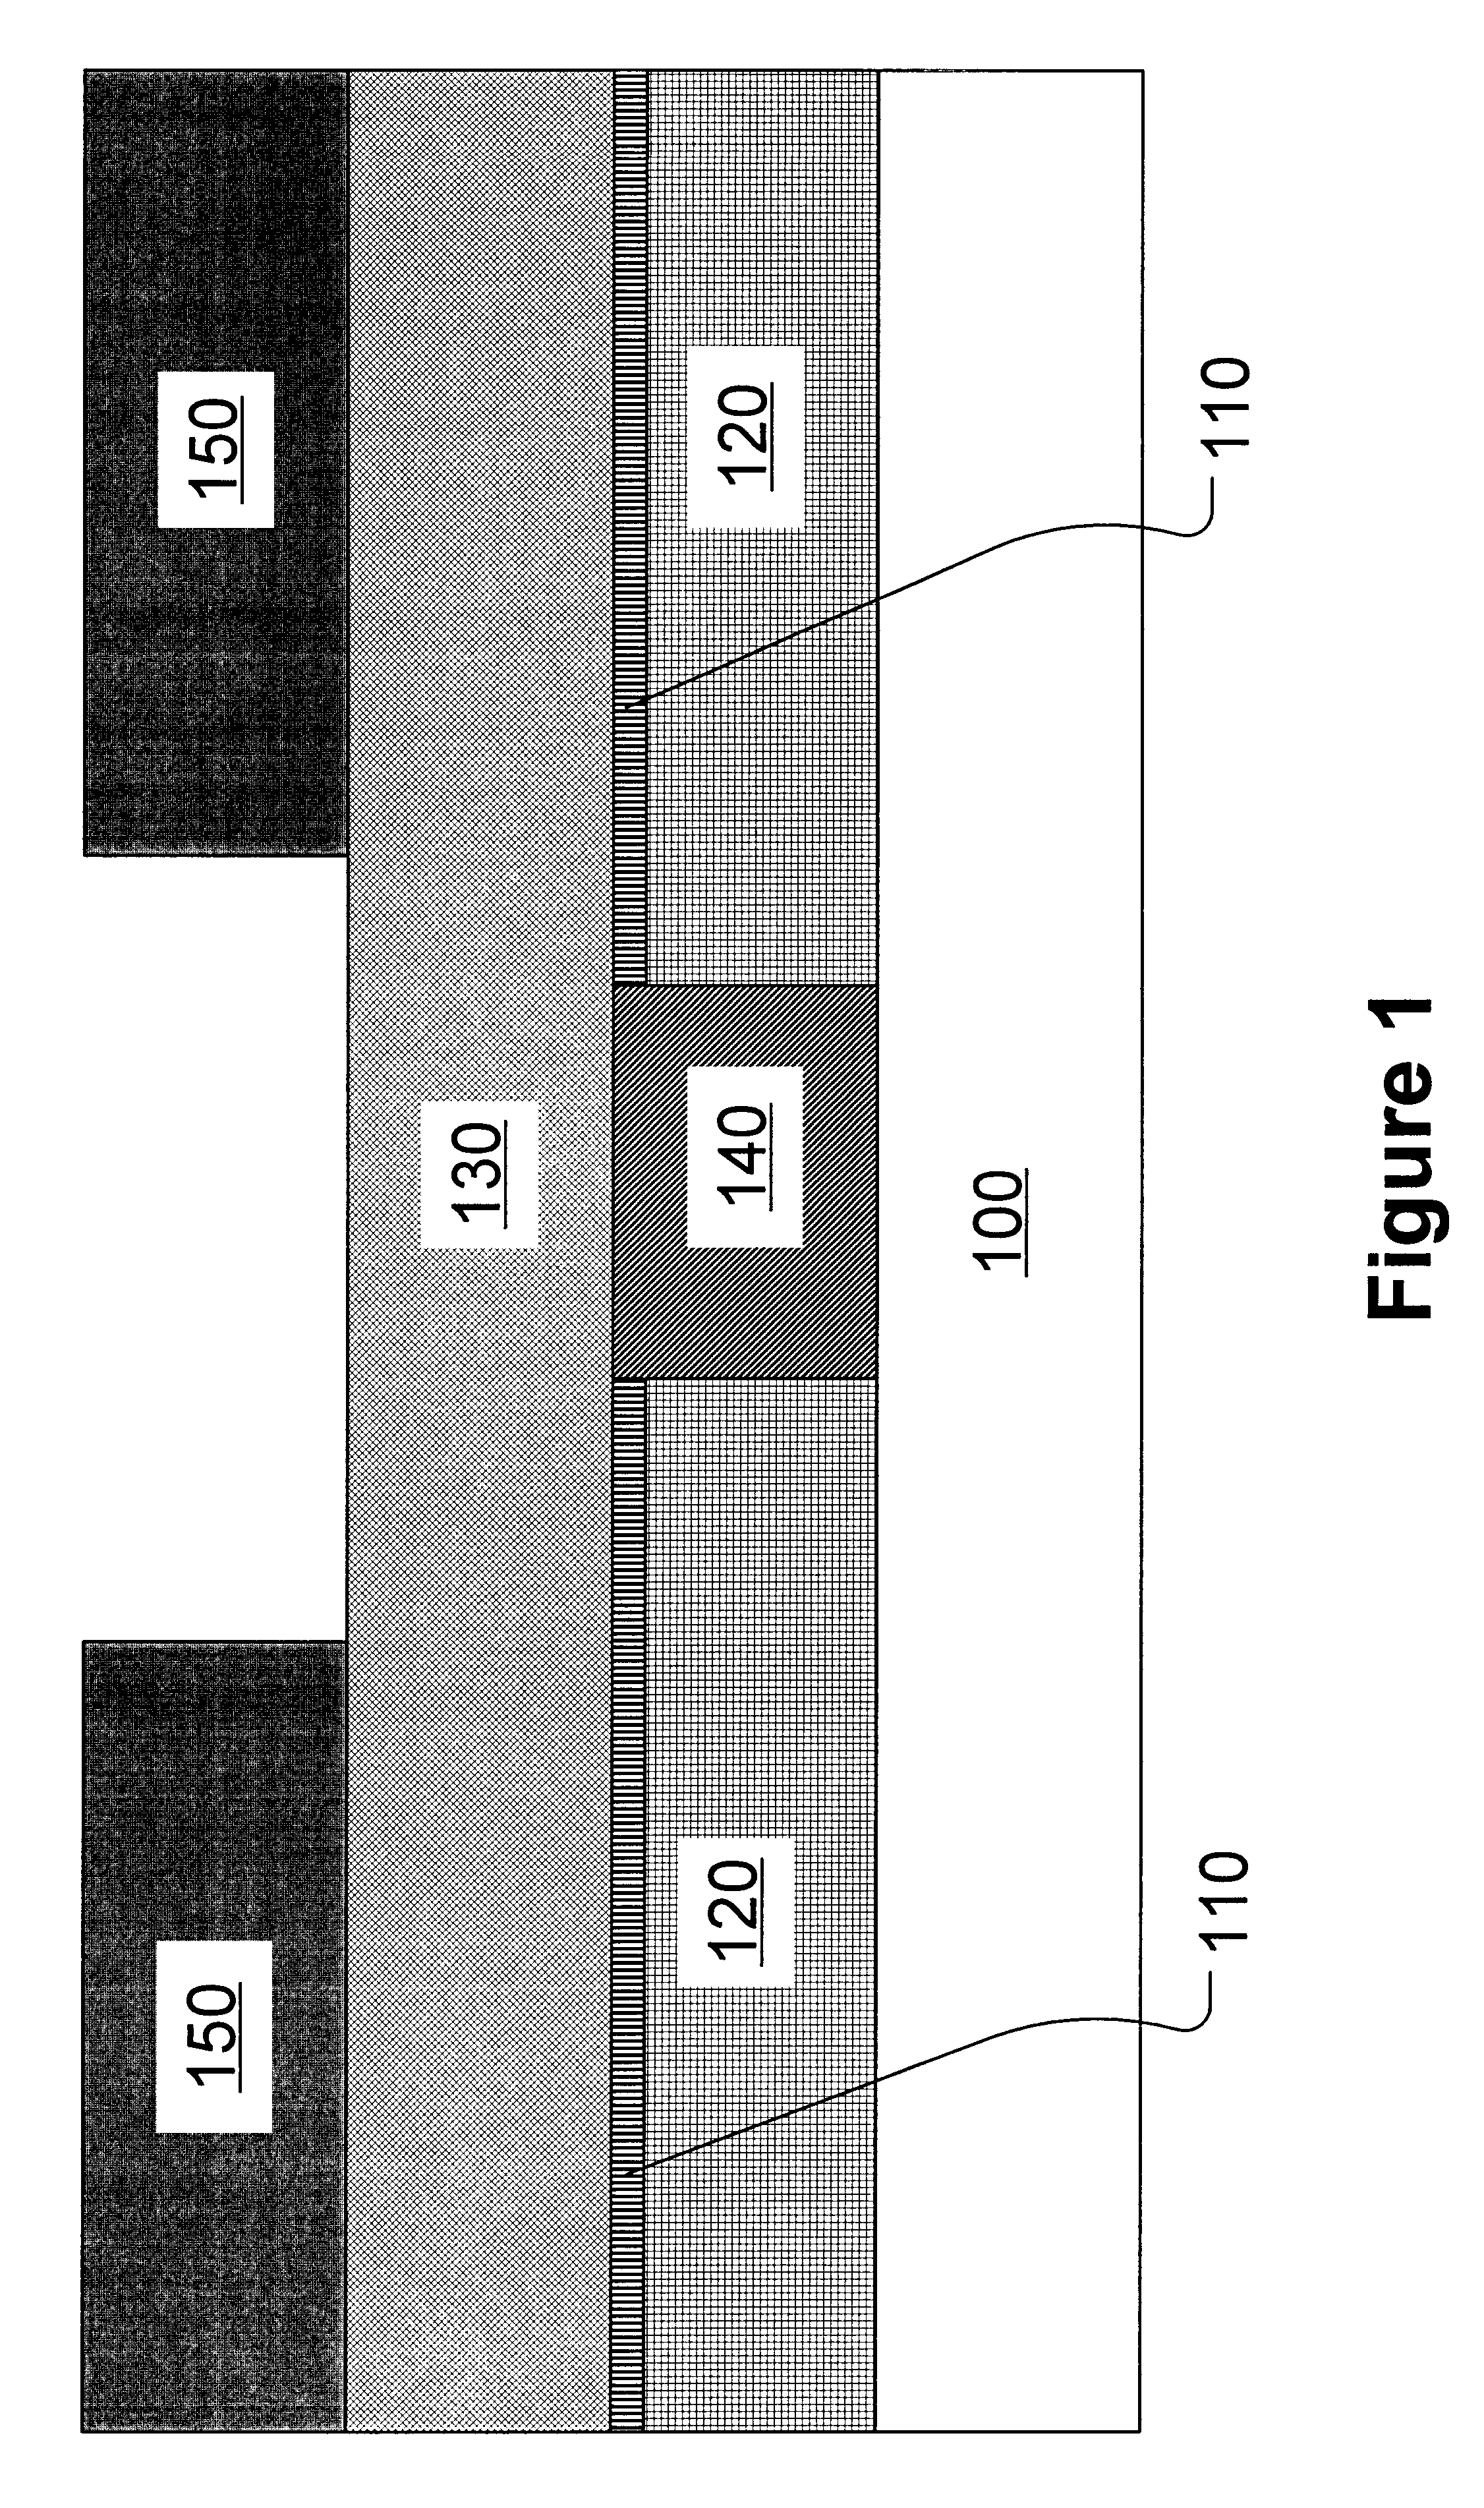 Reverse electroplating of barrier metal layer to improve electromigration performance in copper interconnect devices